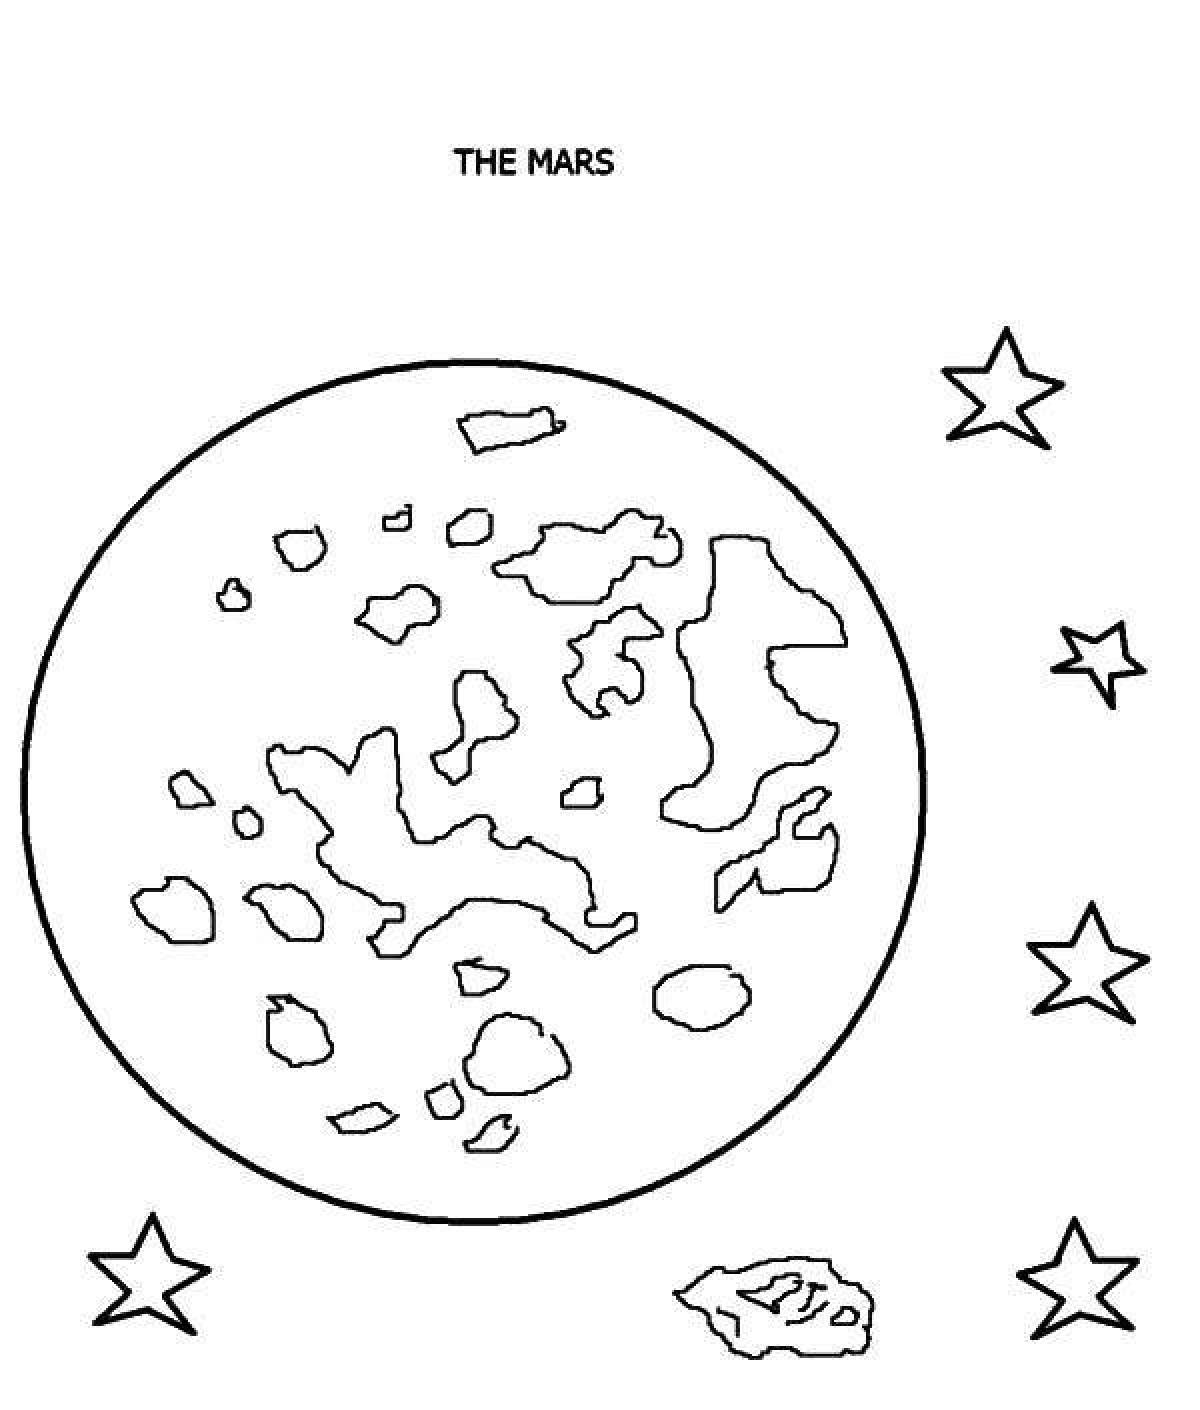 Colorful mars coloring book